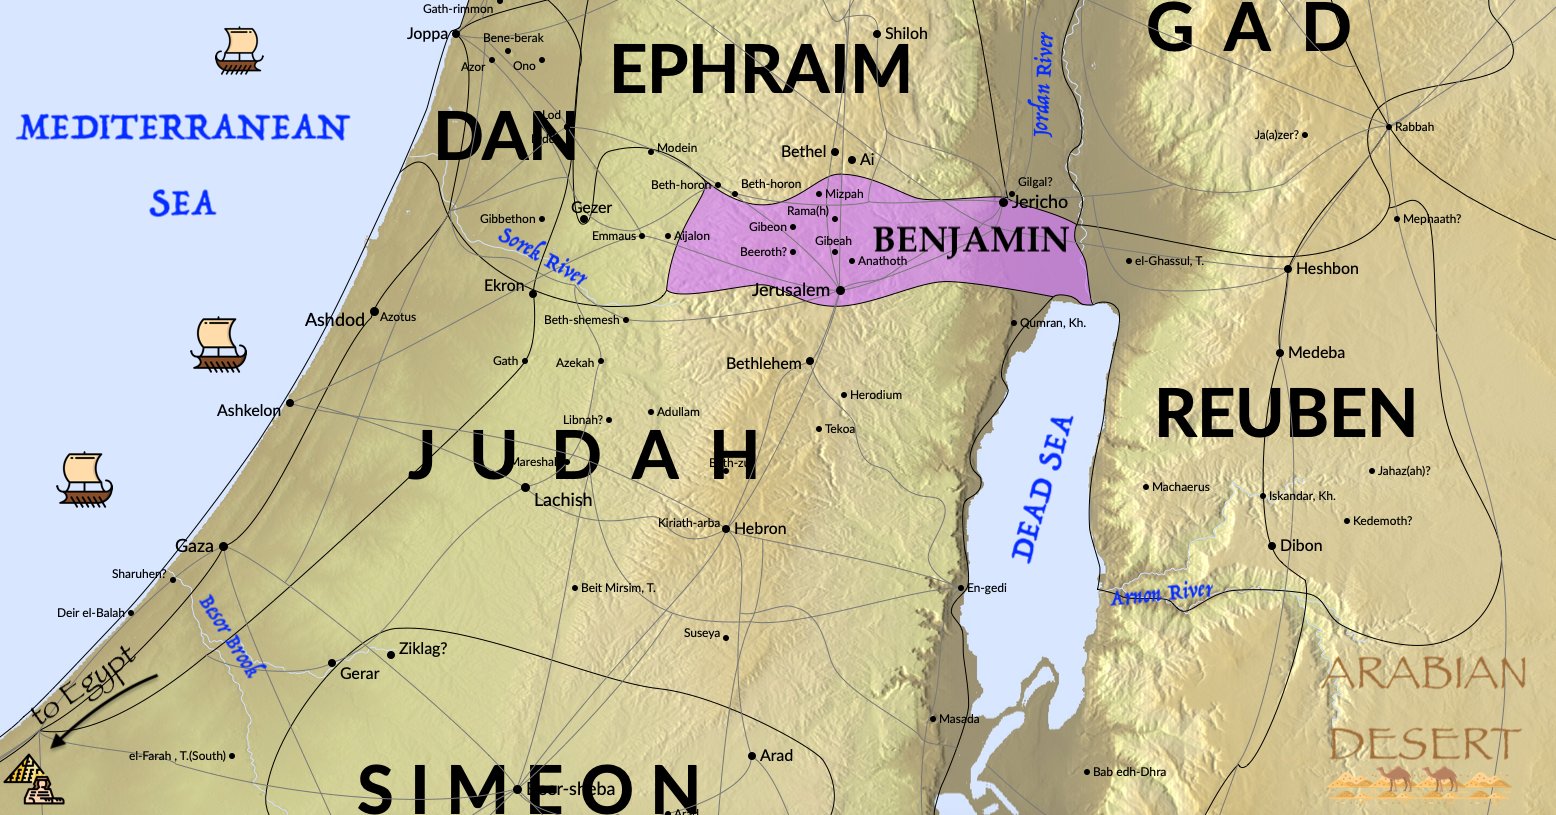 The tribe of Benjamin occupied a central inheritance. Thus, despite its diminutive size the tribe exercised a great deal of influence on the history of Israel.